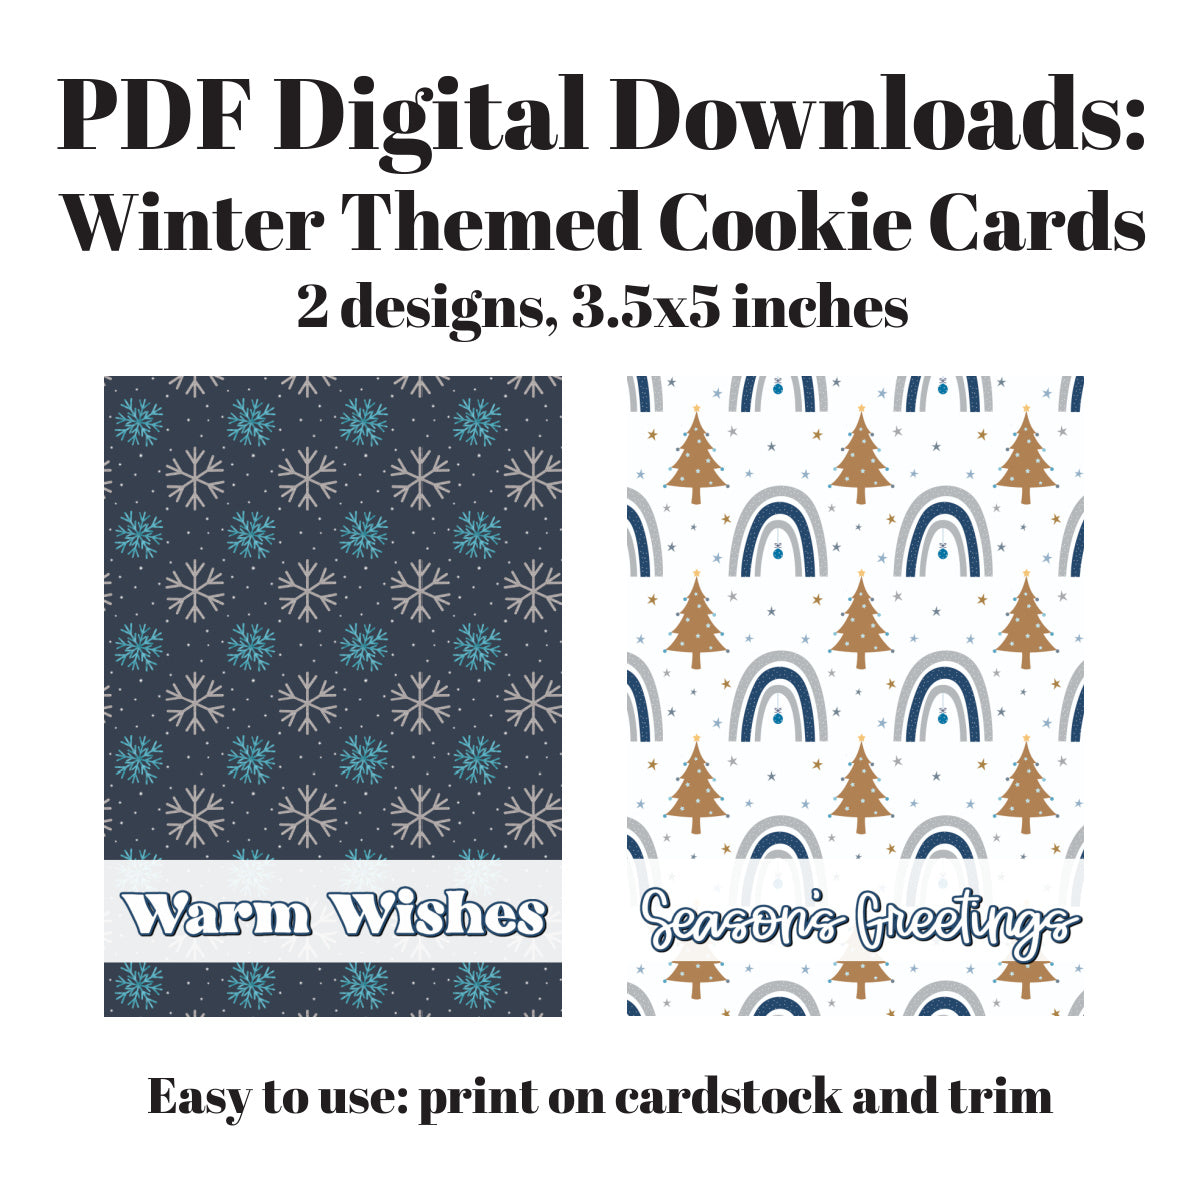 Holiday / Christmas Cookie Cards  (PDF Download)